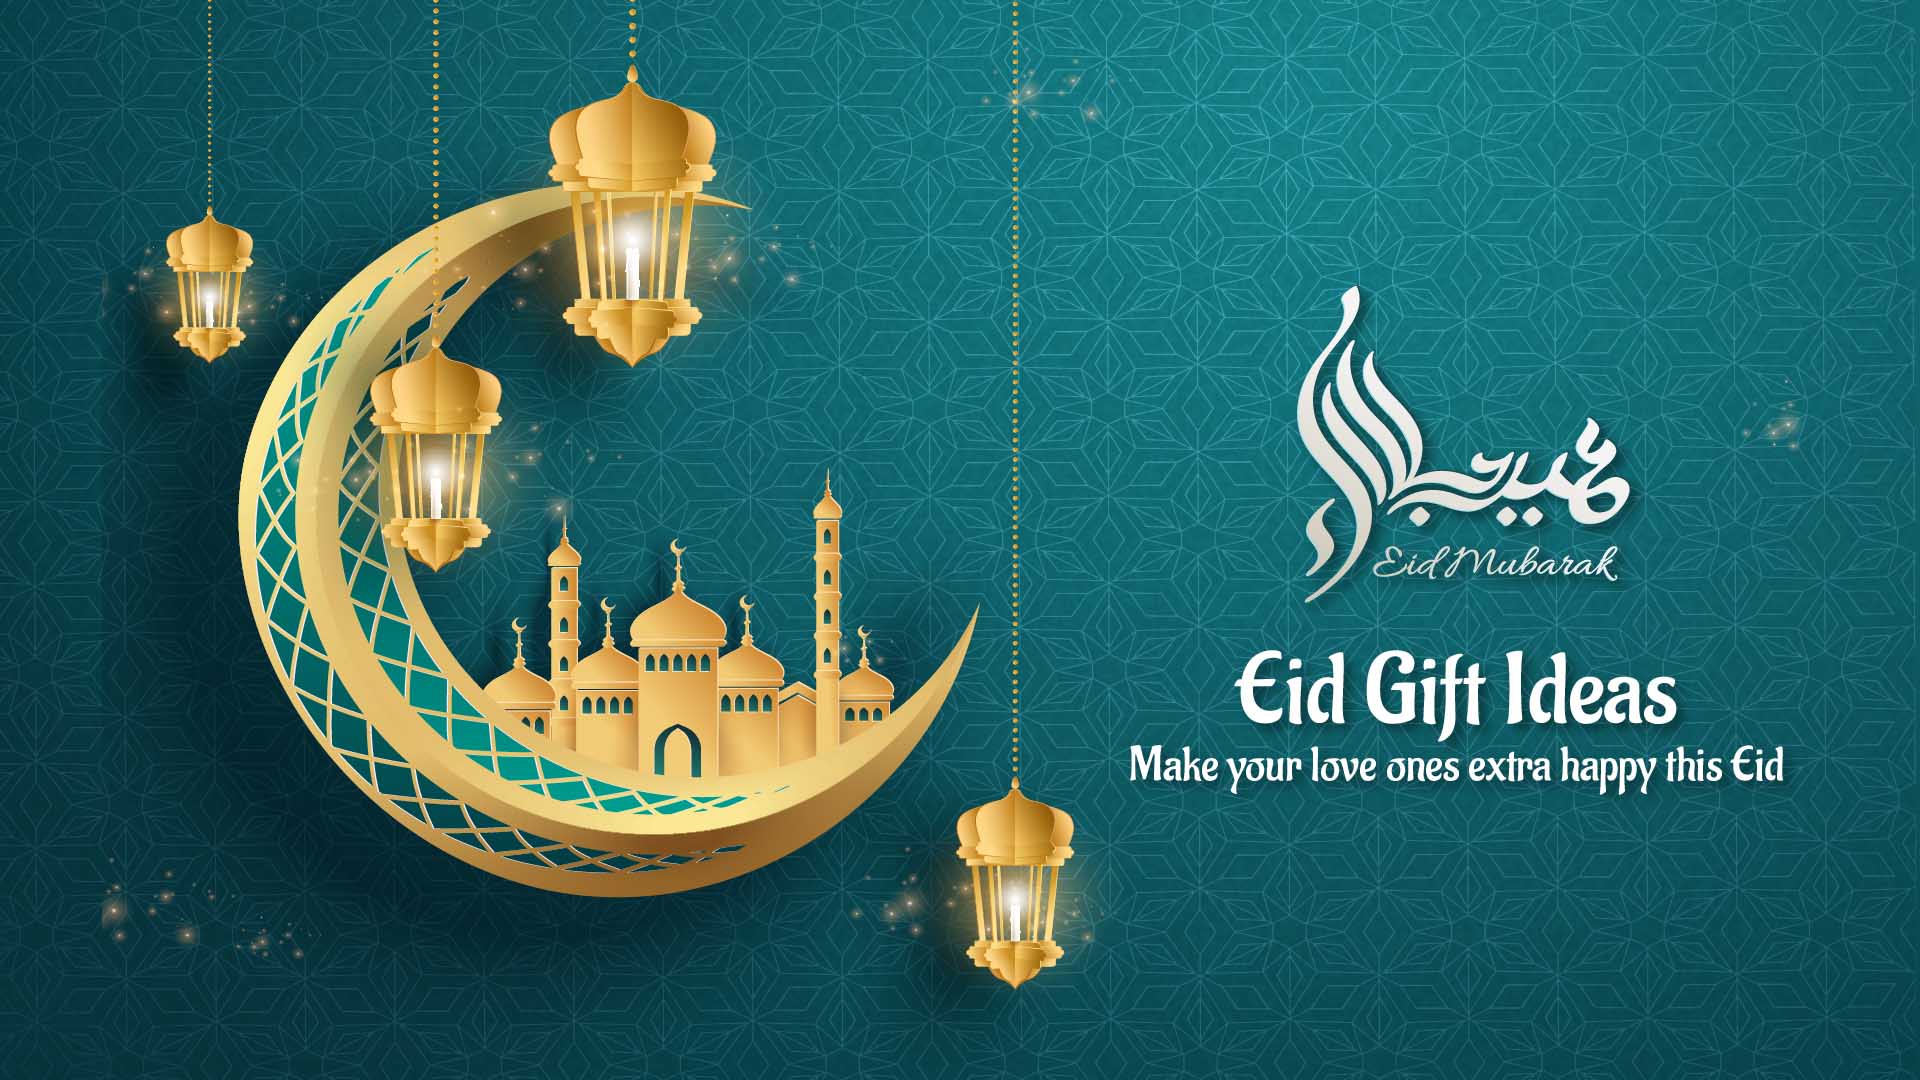 EID Gift Ideas | Make you loved ones extra happy this Eid!